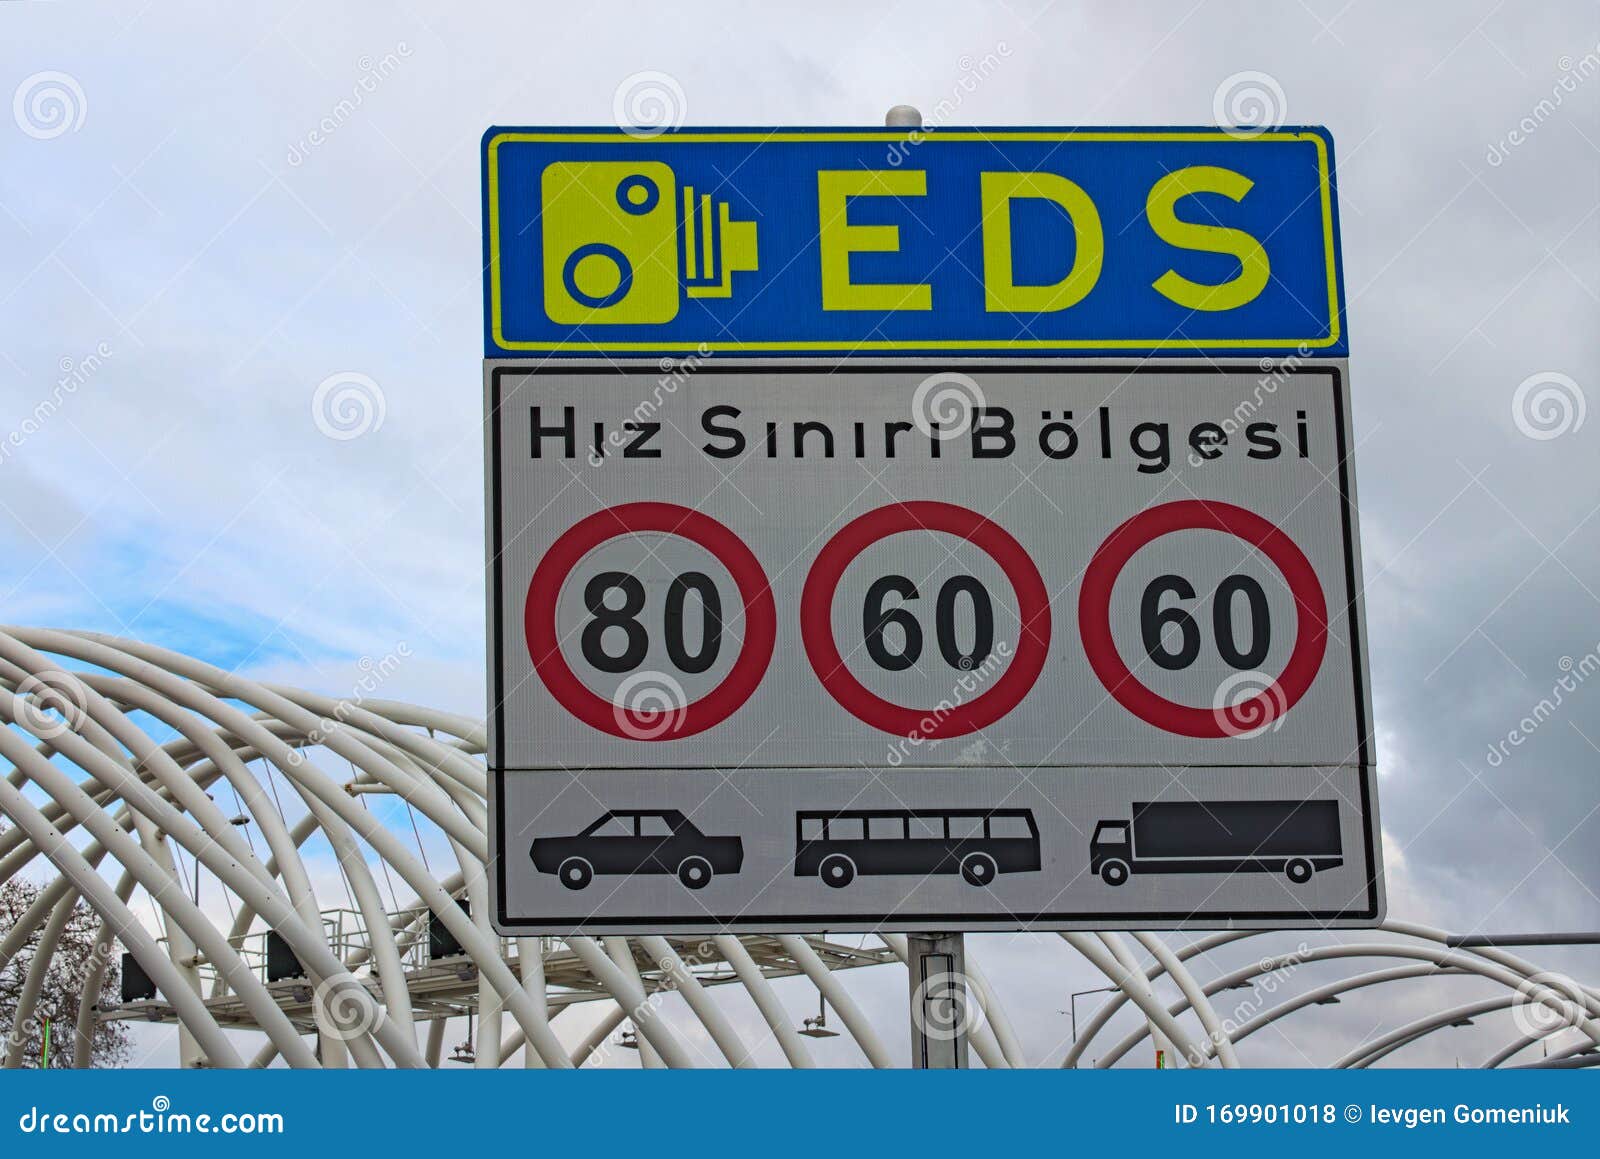 street sign in instanbul. text on sign: speed limit zone. electronic controlling system eds istanbul, turkey